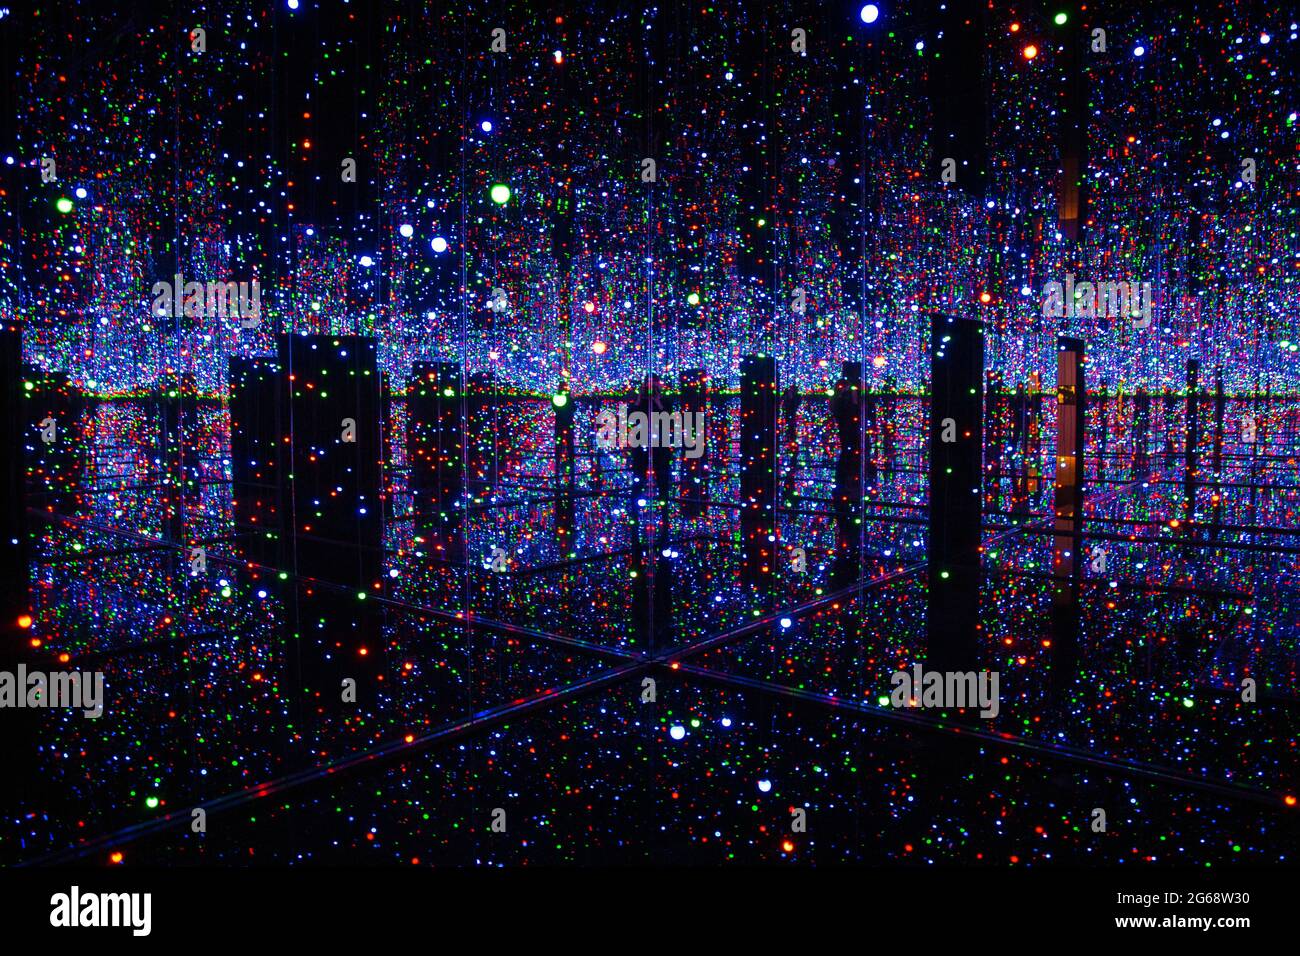 „Infinity Mirrored Room - Filled with the Brilliance of Life“ in der Yayoi Kusama Infinity Mirror Rooms Ausstellung 2021 in der Tate Modern, London, Großbritannien Stockfoto